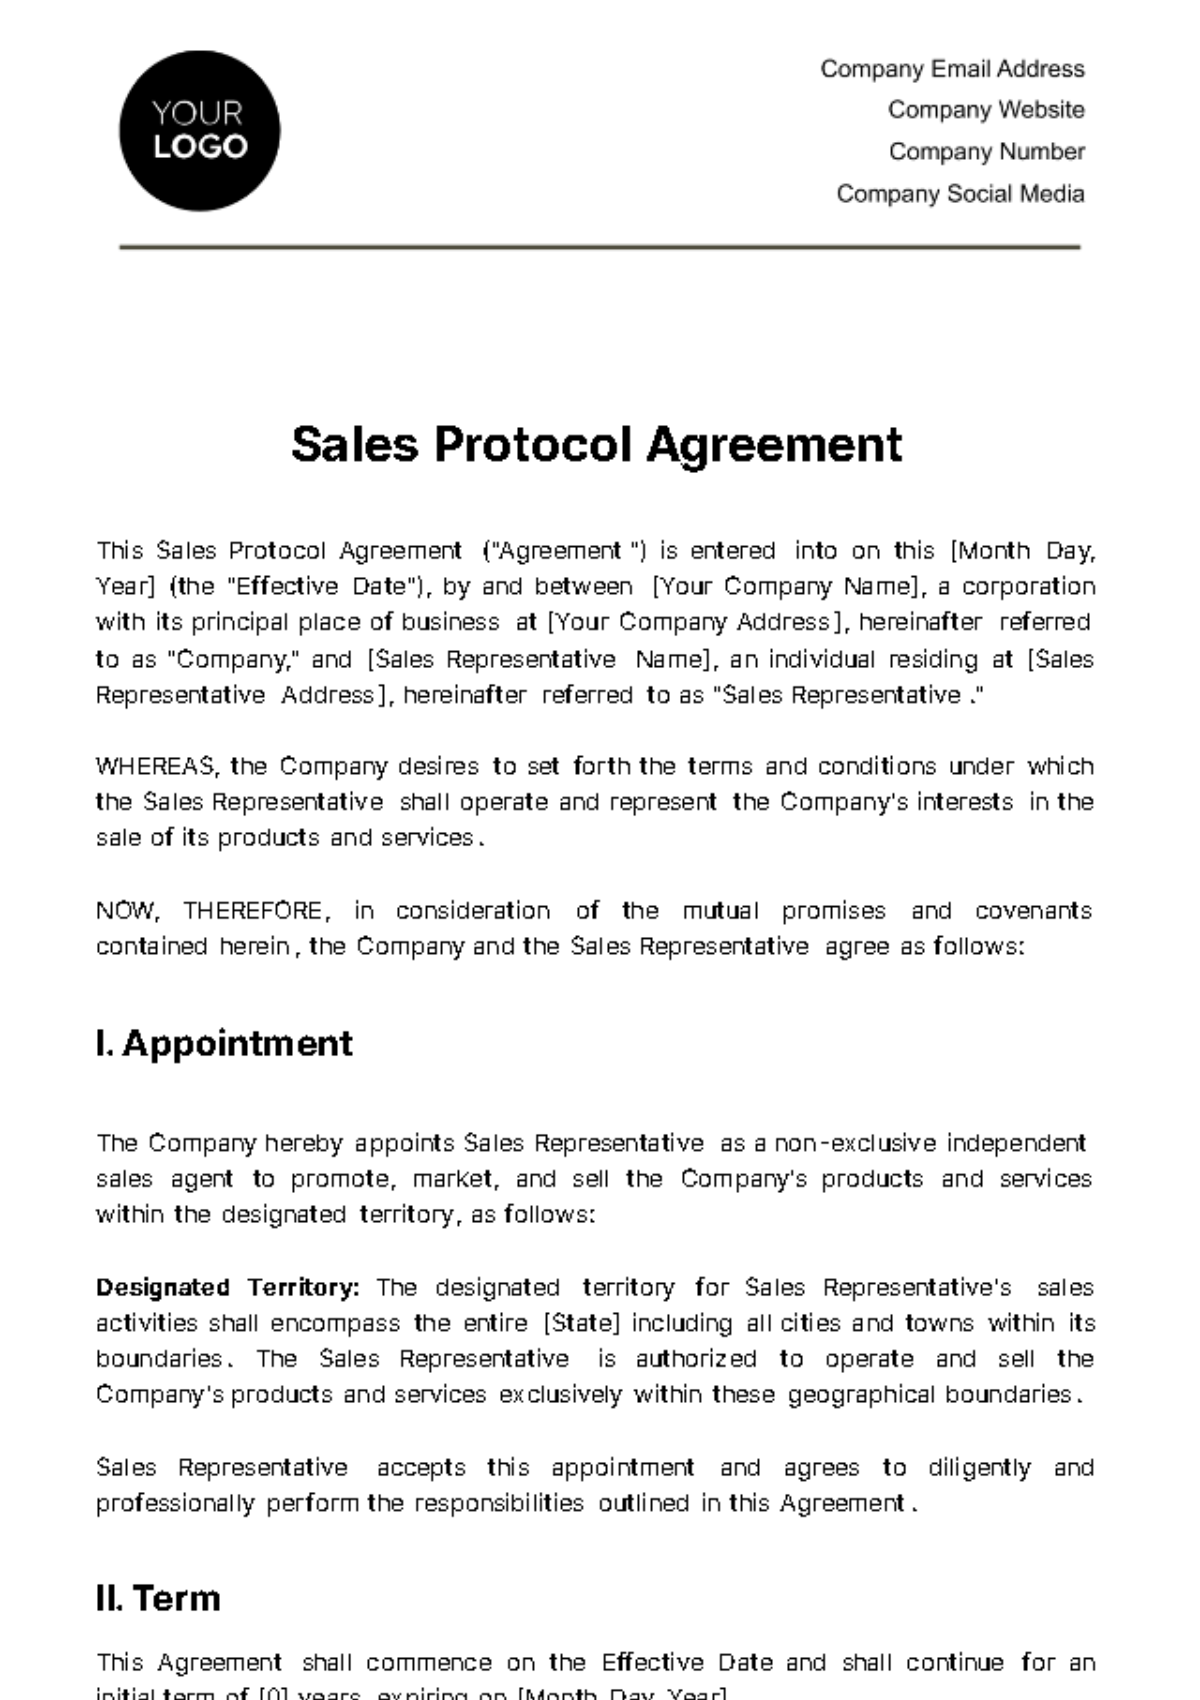 Sales Protocol Agreement Template